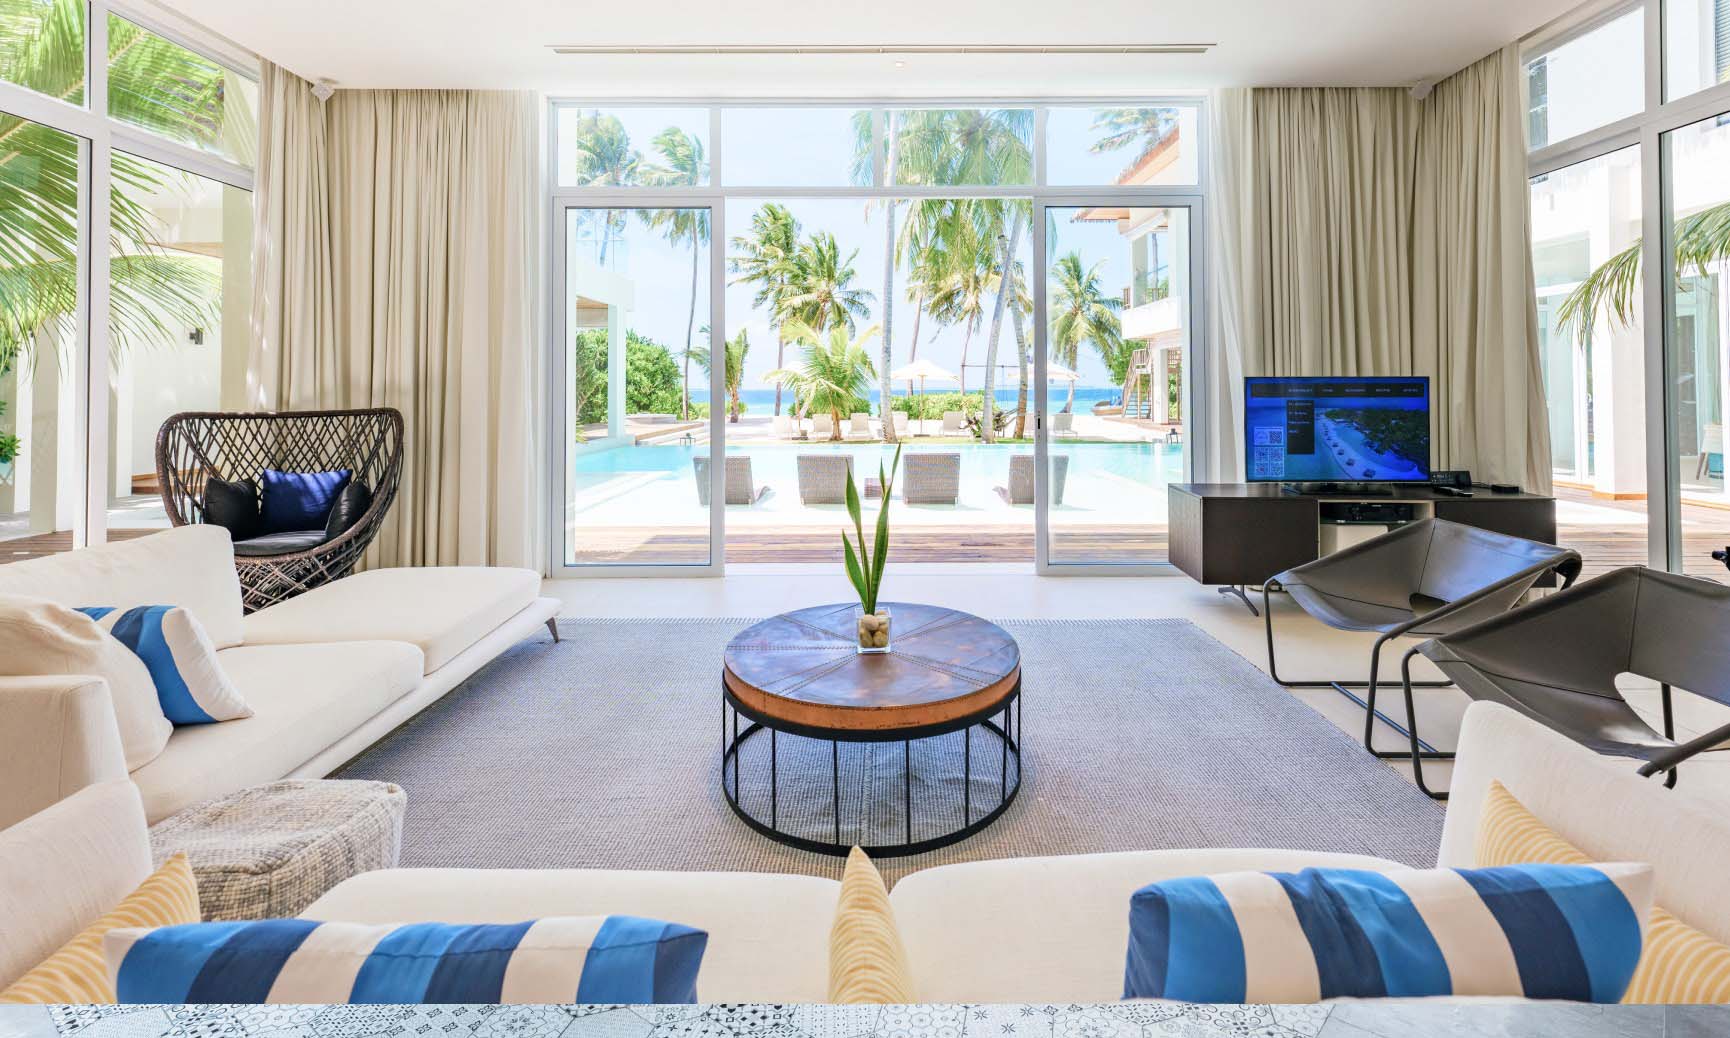 The large living area with floor to ceiling windows inside of our luxury Maldives Family Accommodations.